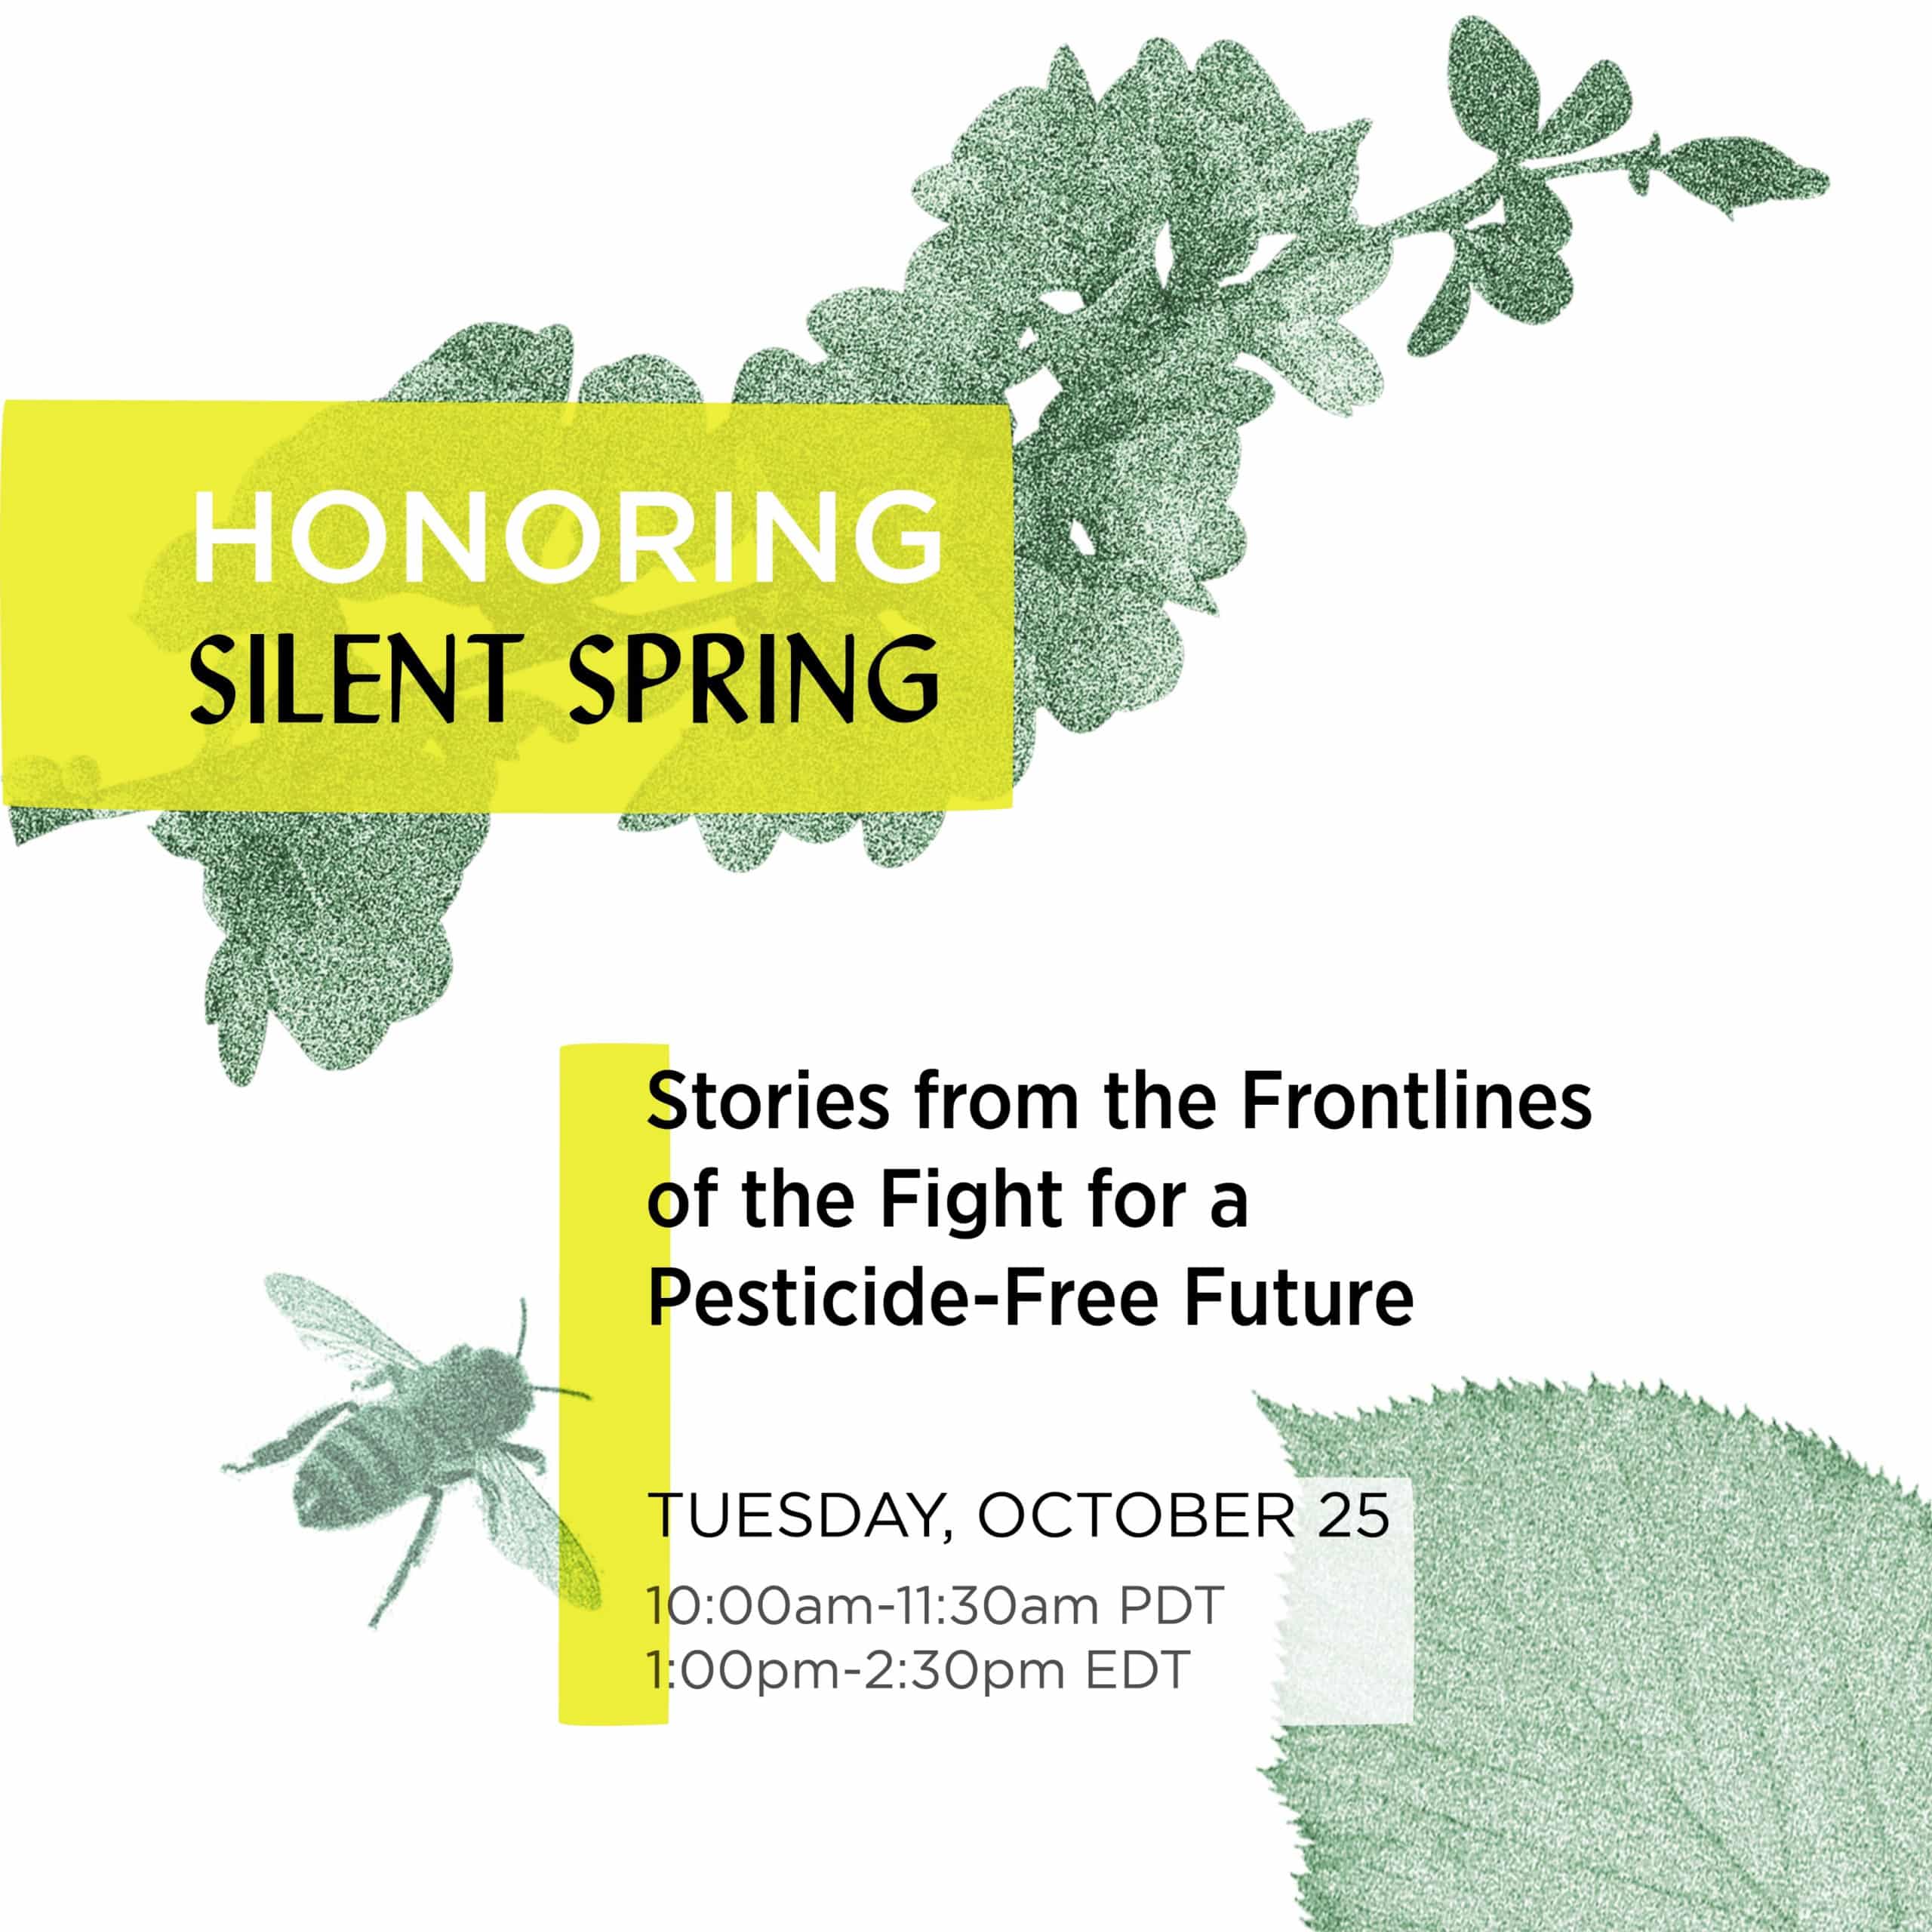 Honoring Silent Spring: Stories from the Frontlines of the Fight for a Pesticide-Free Future. Tues. Oct 25 10 am PT